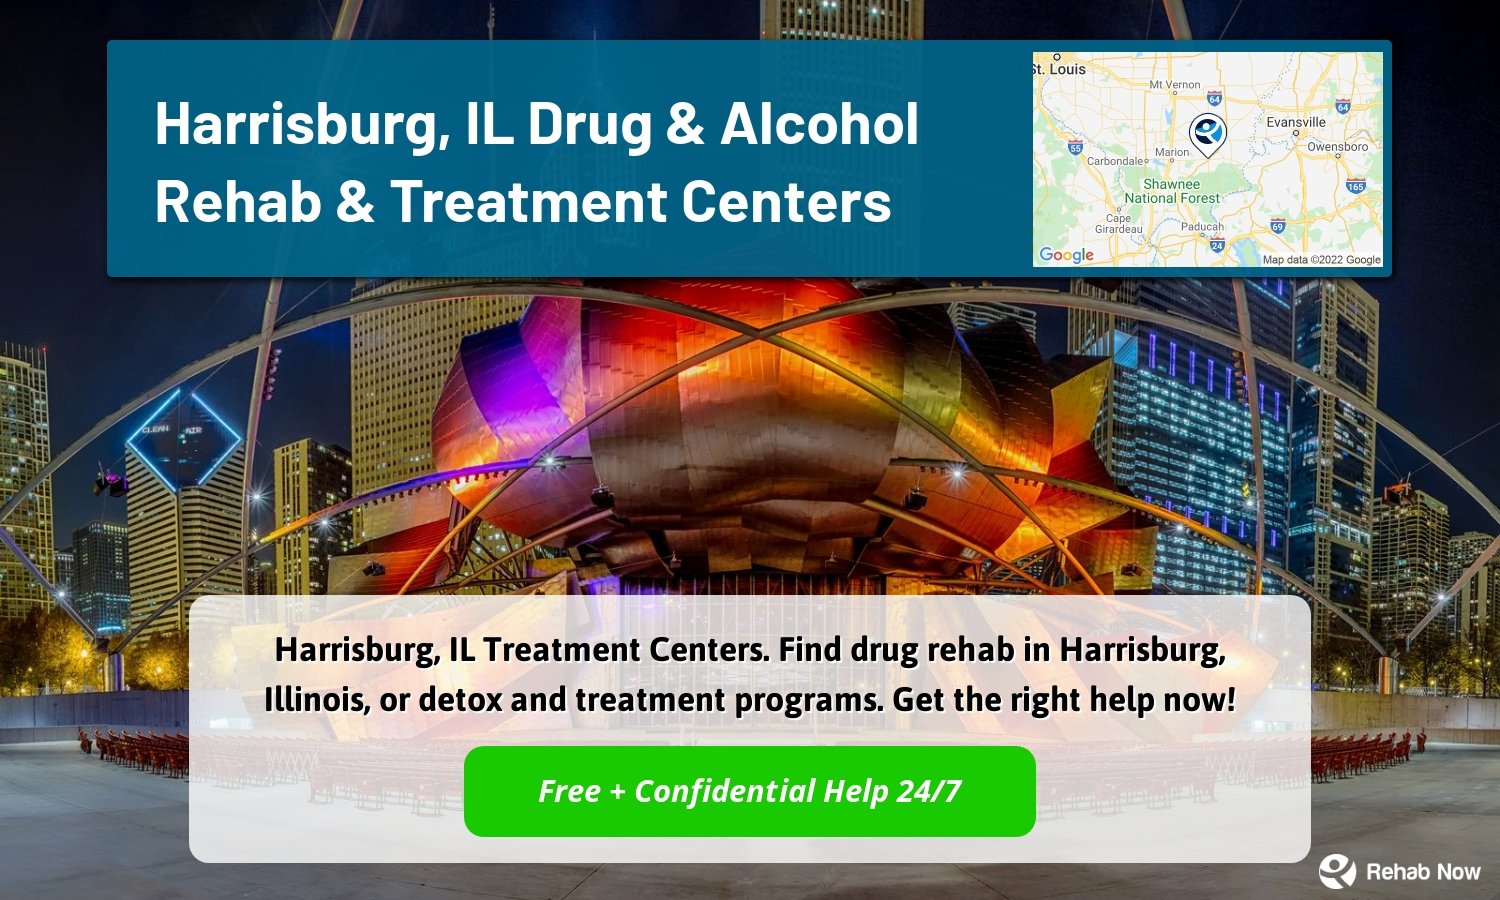 Harrisburg, IL Treatment Centers. Find drug rehab in Harrisburg, Illinois, or detox and treatment programs. Get the right help now!